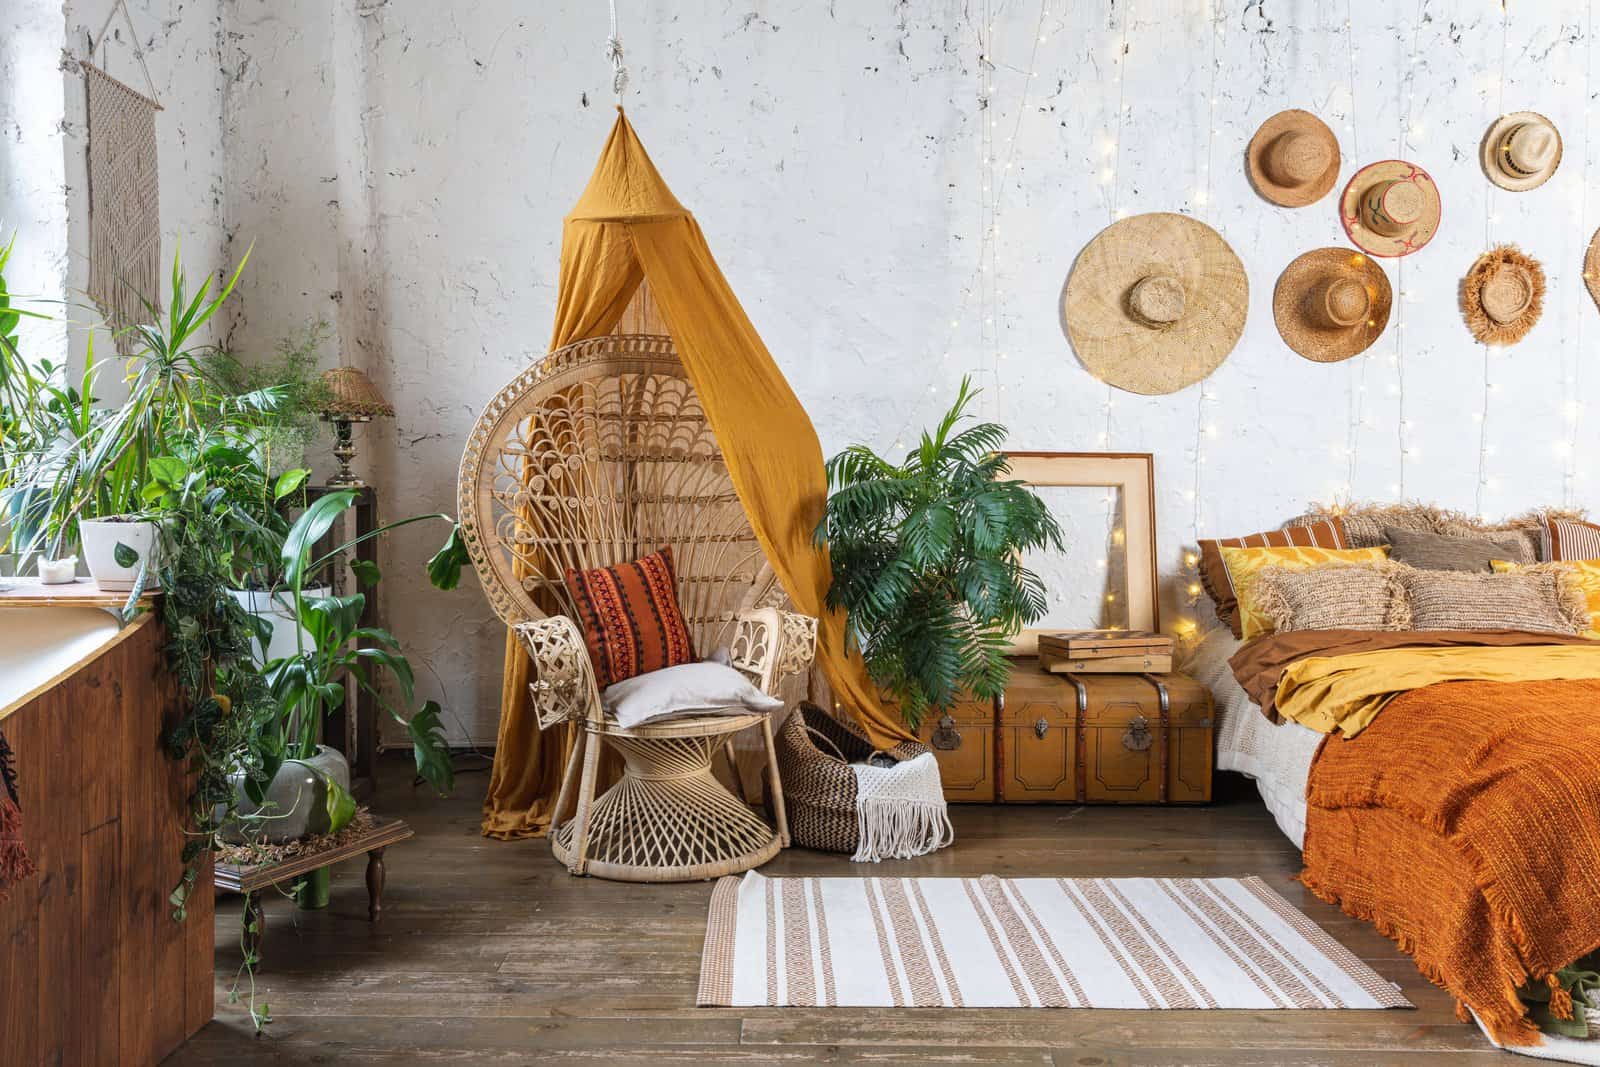 Elegant,And,Quiet,Bohemian,Room,With,Cozy,Interior,,Wicker,Chair,